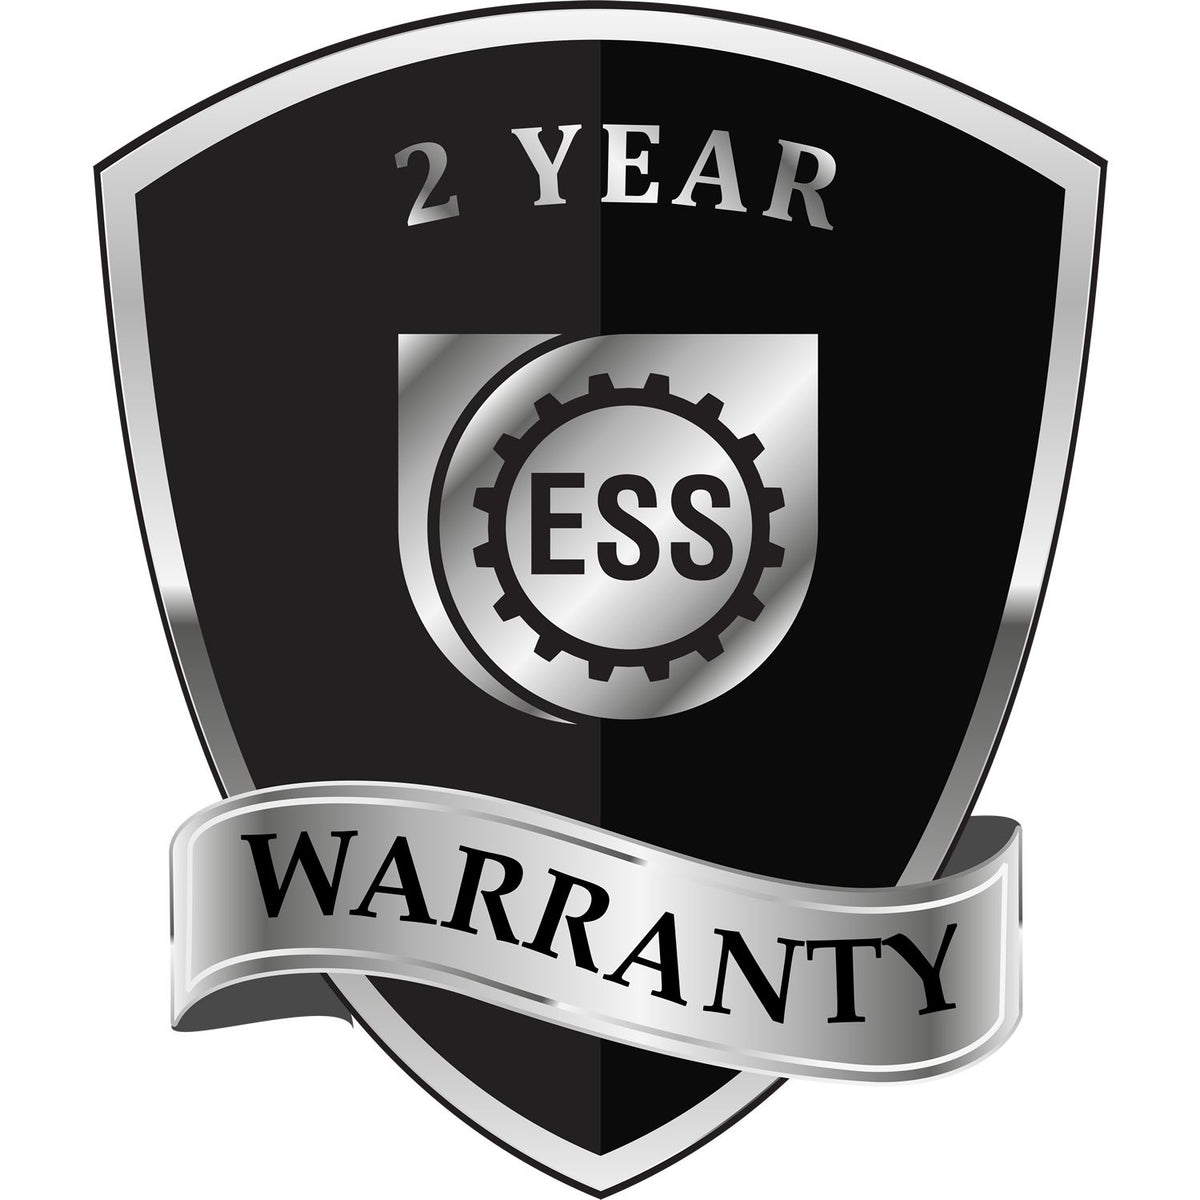 A badge or emblem showing a warranty icon for the Heavy Duty Cast Iron Alaska Engineer Seal Embosser